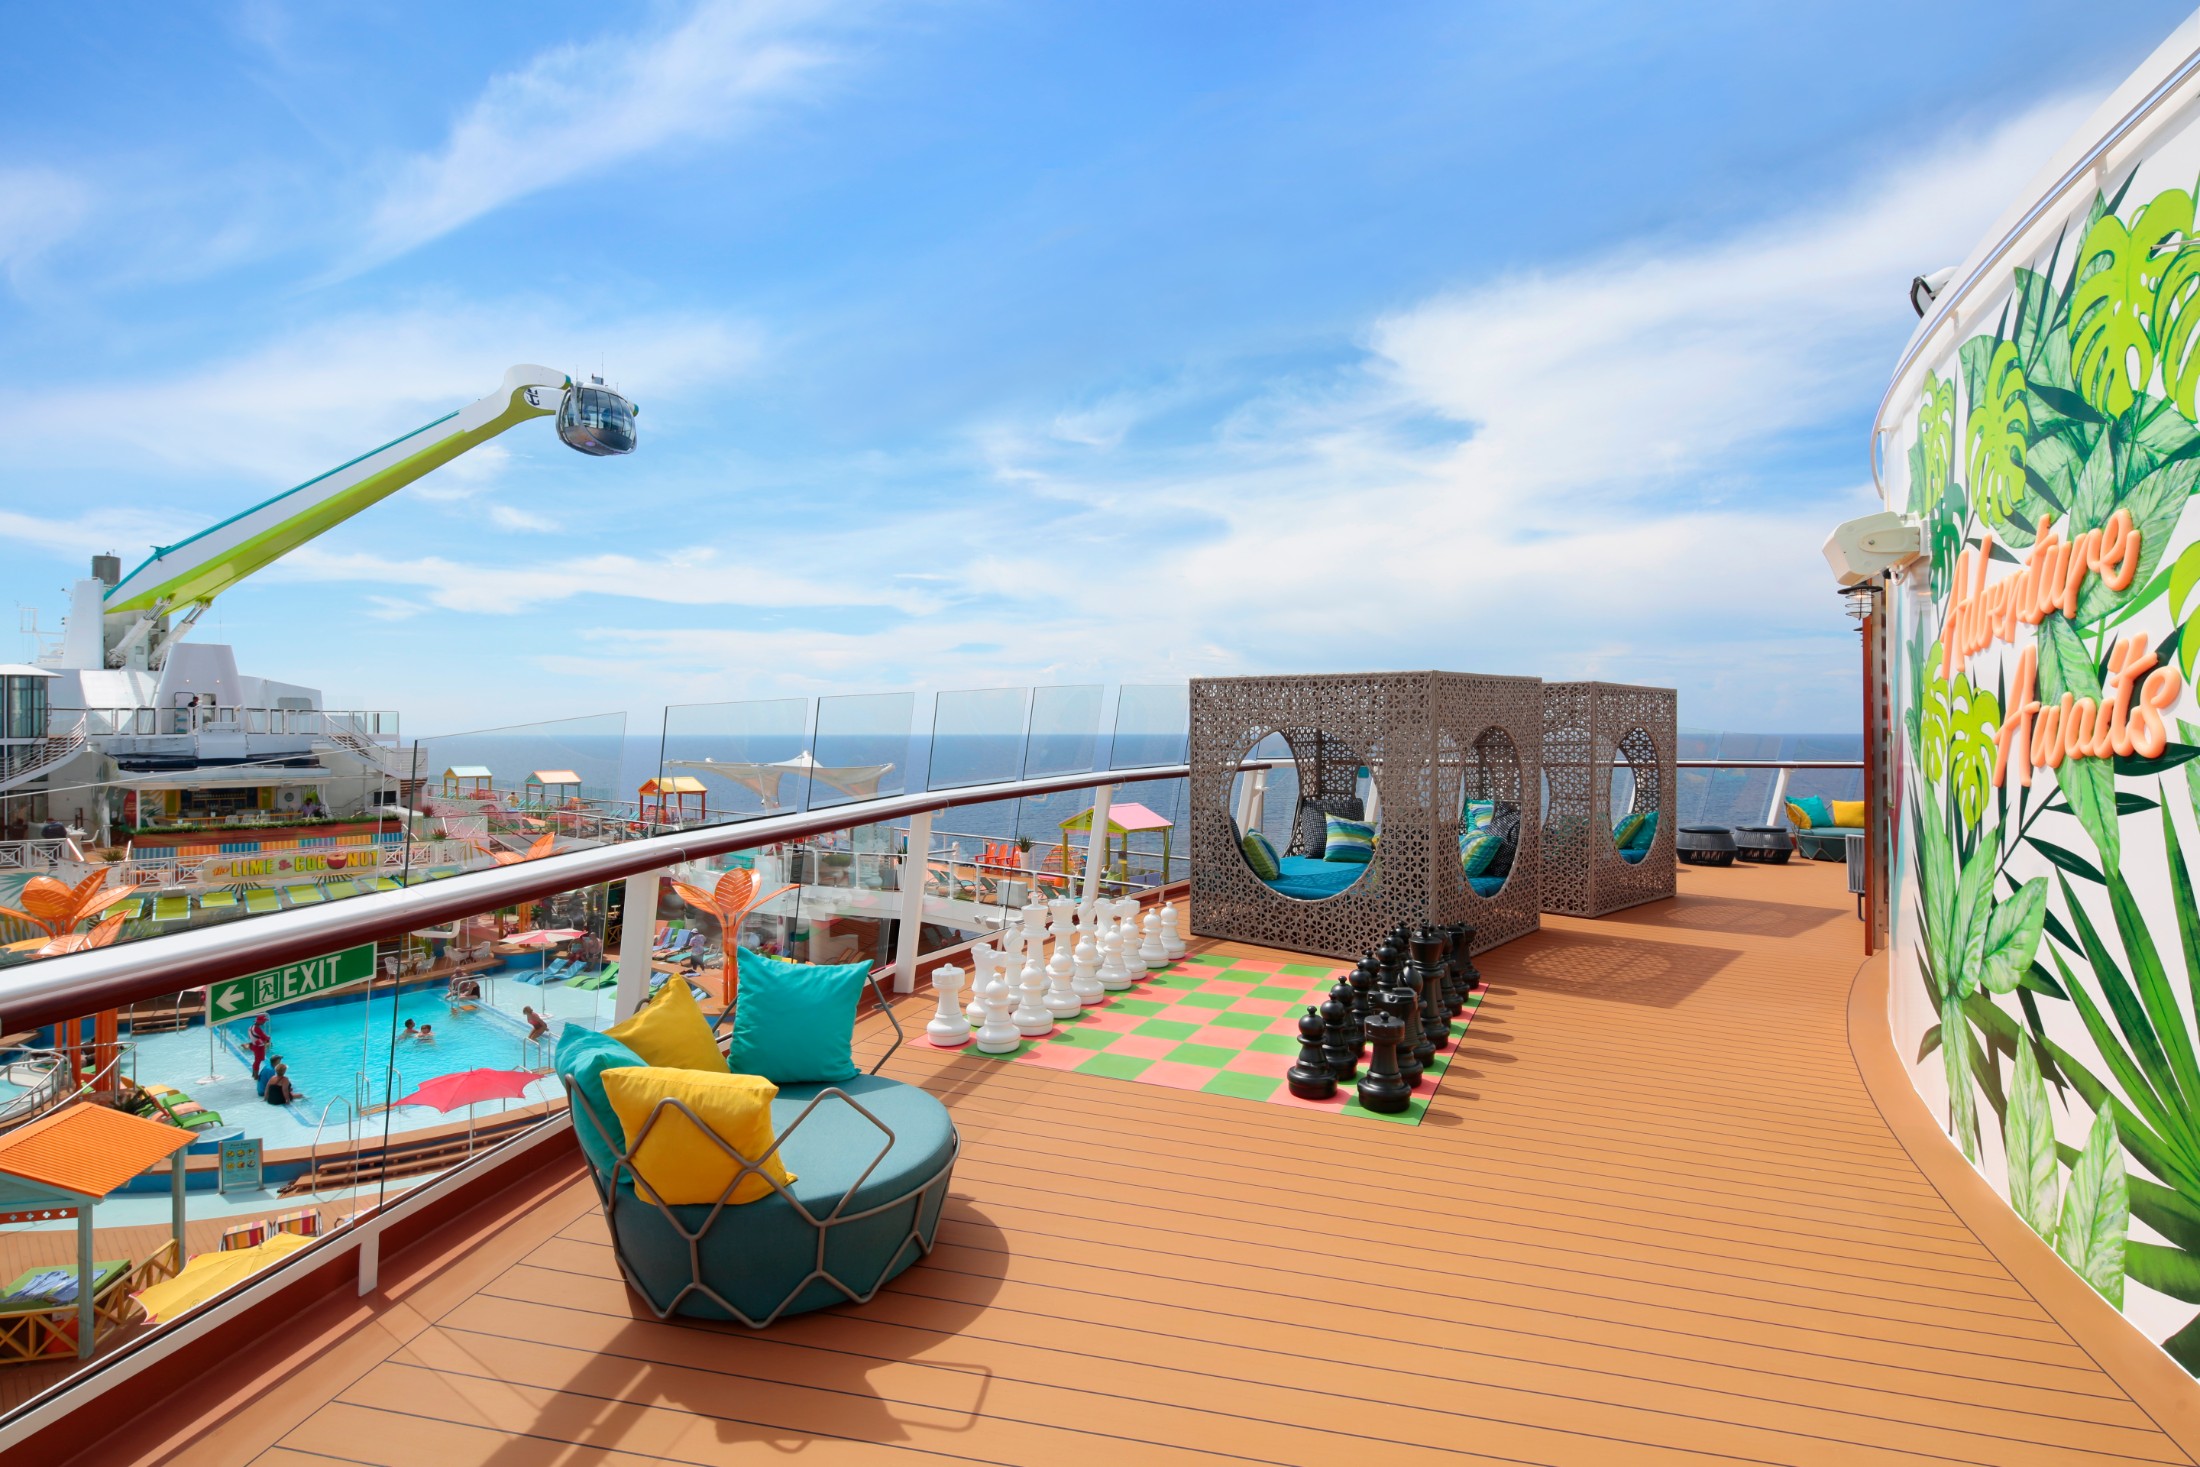 Teens sailing on Odyssey of the Seas can enjoy dedicated spaces to hang out without adults cramping their style. Social180 offers the latest in music, games and movies as well as an outdoor deck called The Patio.